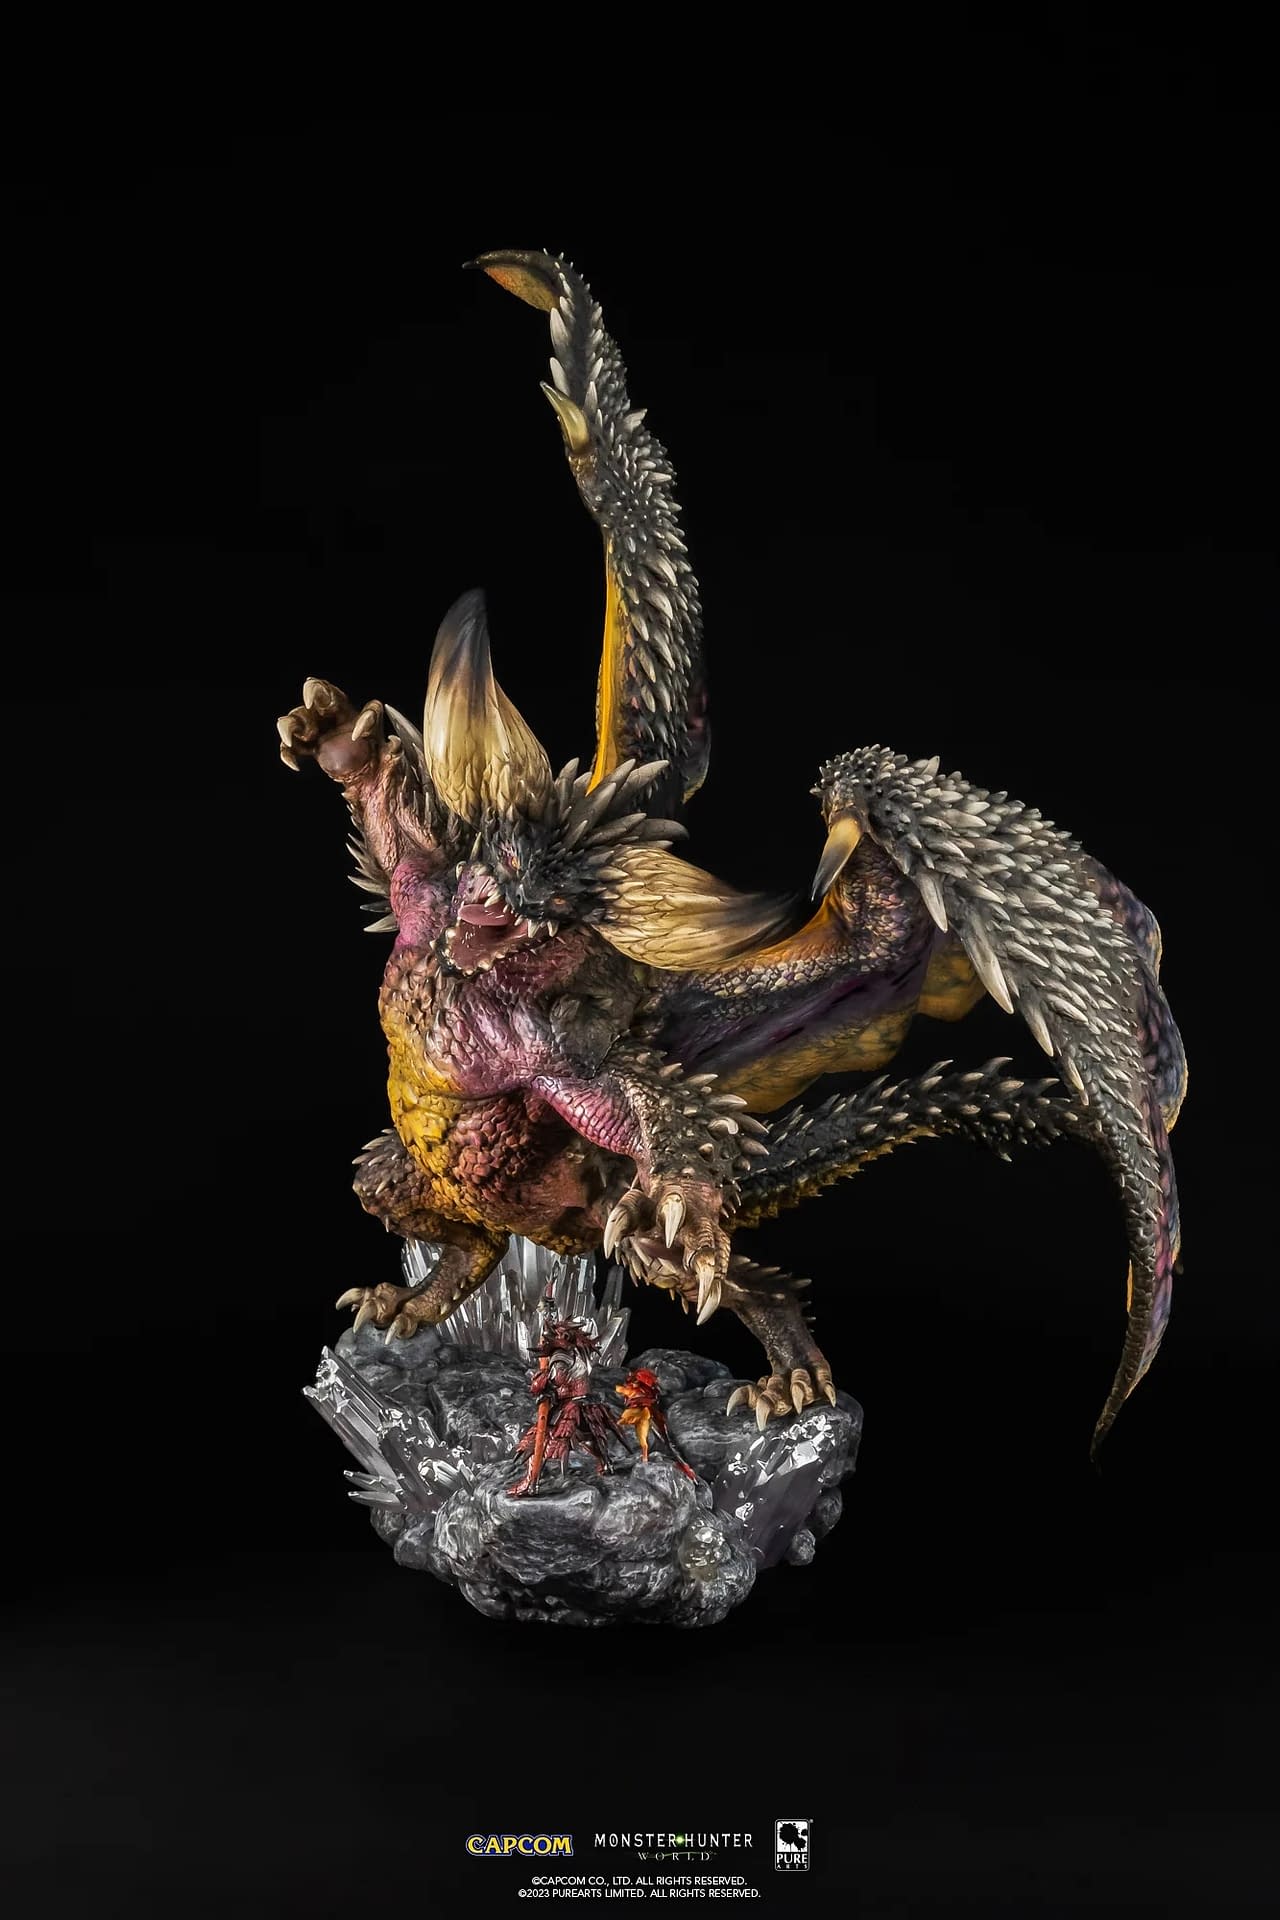 Monster Hunter World Pukei-Pukei Statue Available for Preorder Now